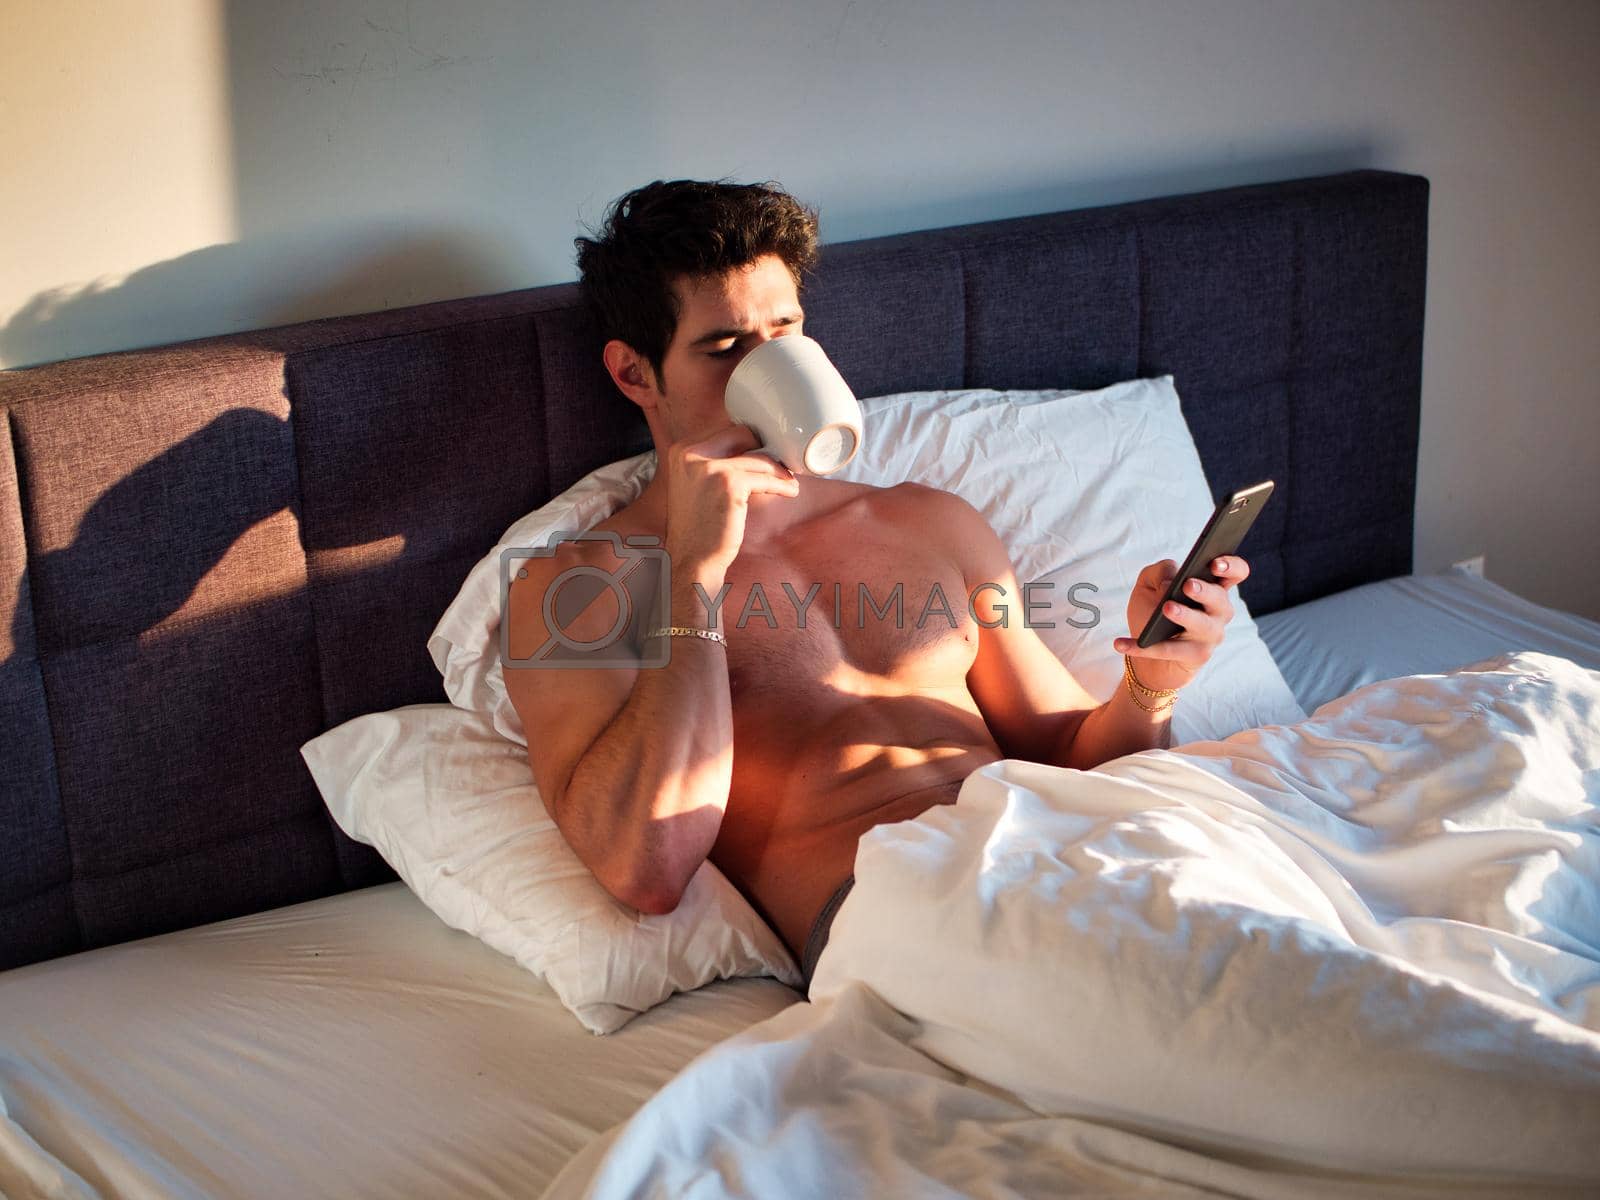 Royalty free image of Naked young man in bed with coffee or tea cup by artofphoto